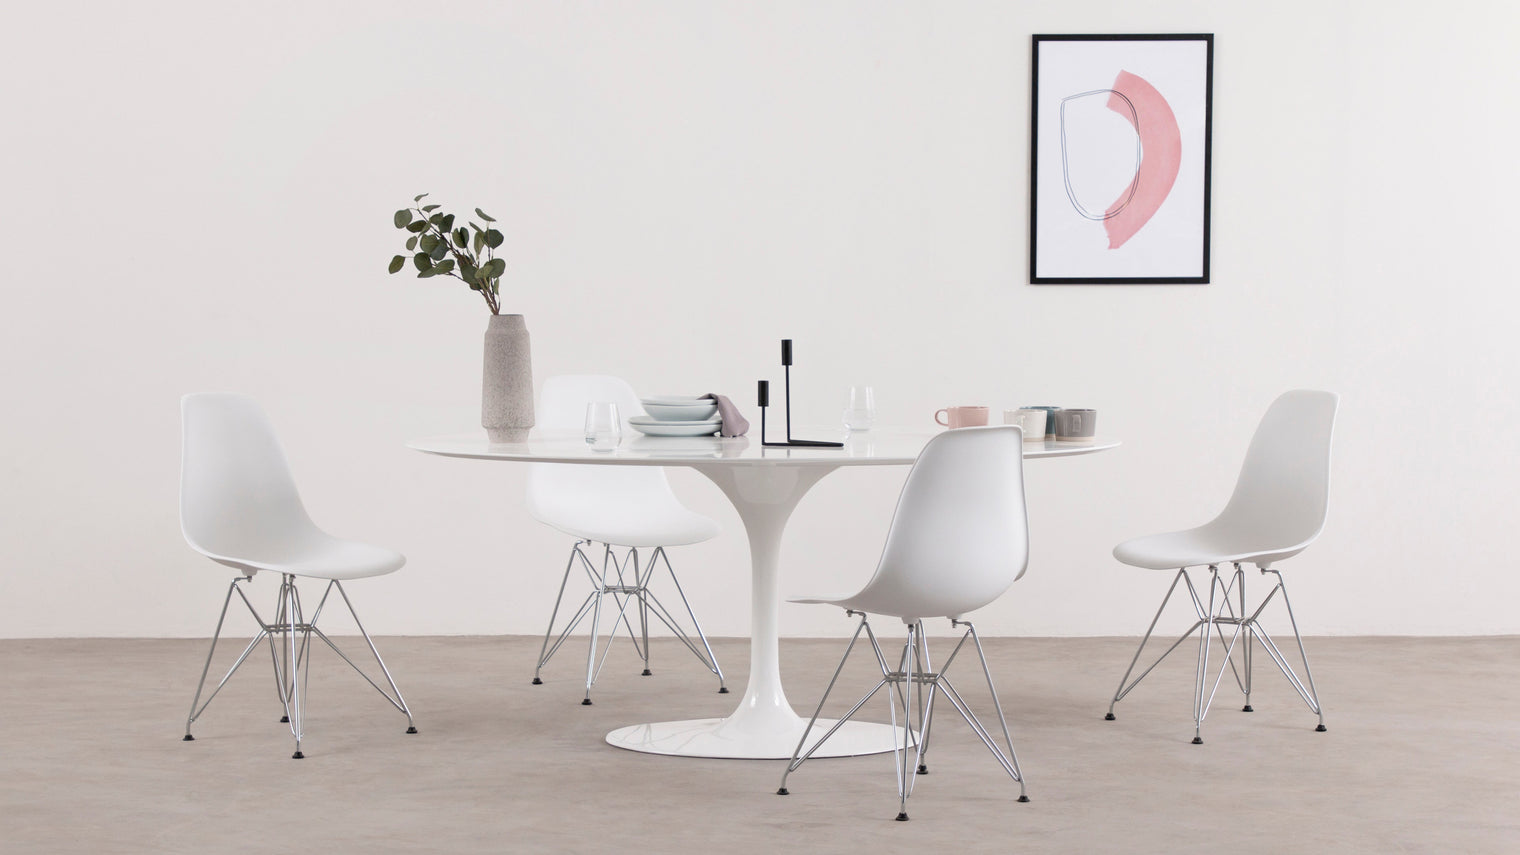 Simplicity meets sophistication|The perfect solution for casual seating, this carefully constructed design is seemingly simple. The chair's clean lines and minimalist aesthetic make it a versatile addition to any interior style.
